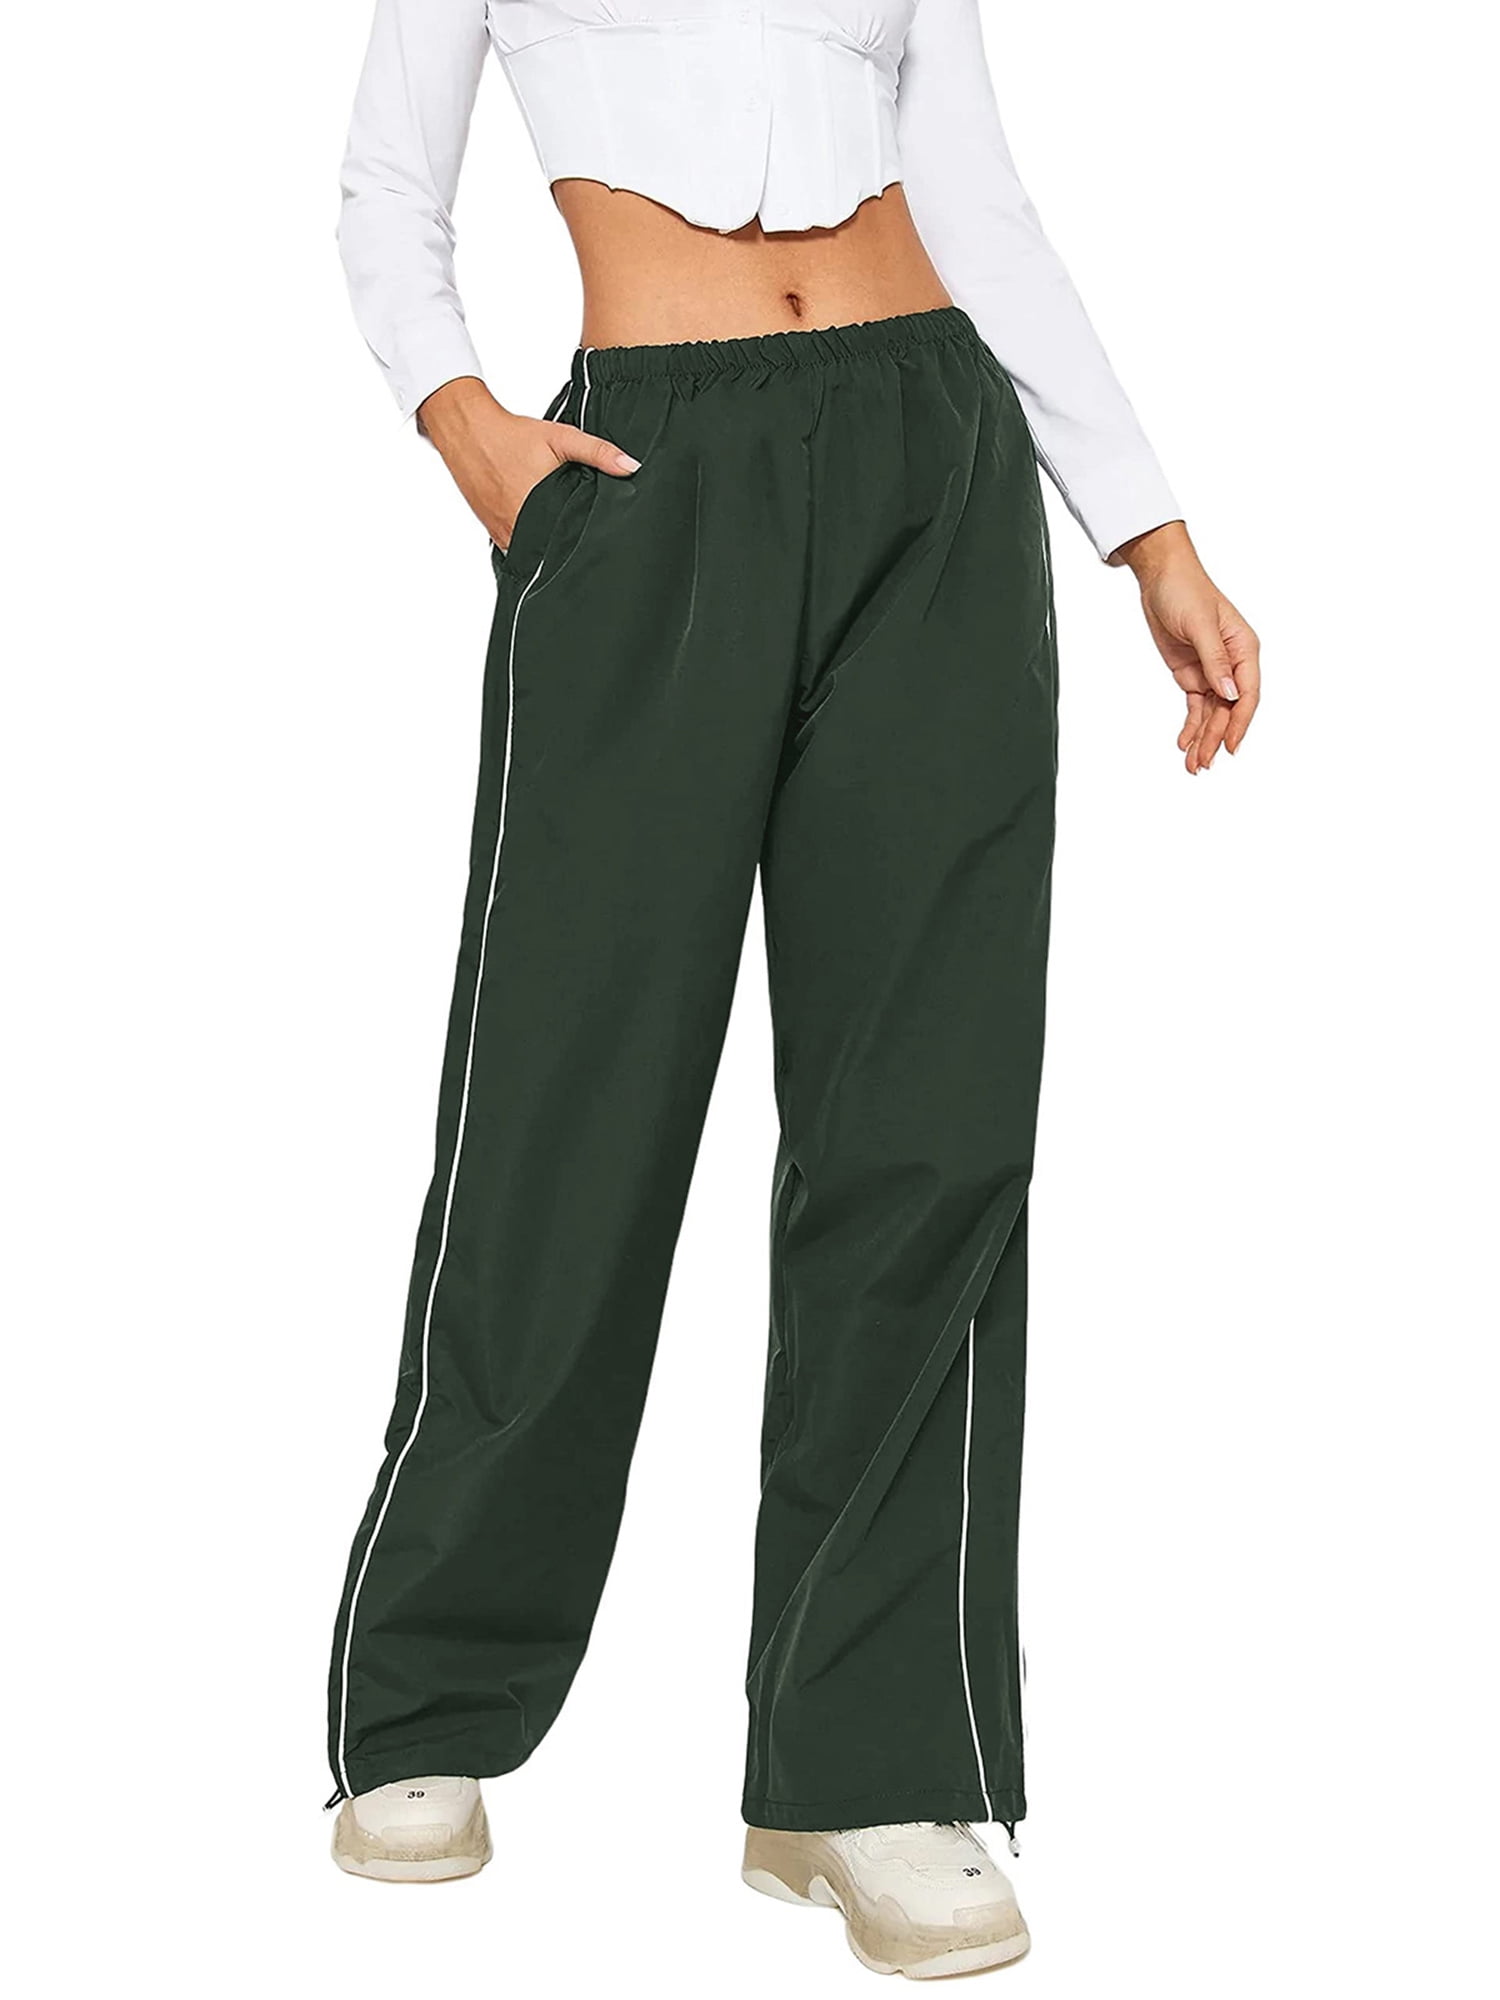 Joggers & Track Pants in wool for girls | FASHIOLA INDIA